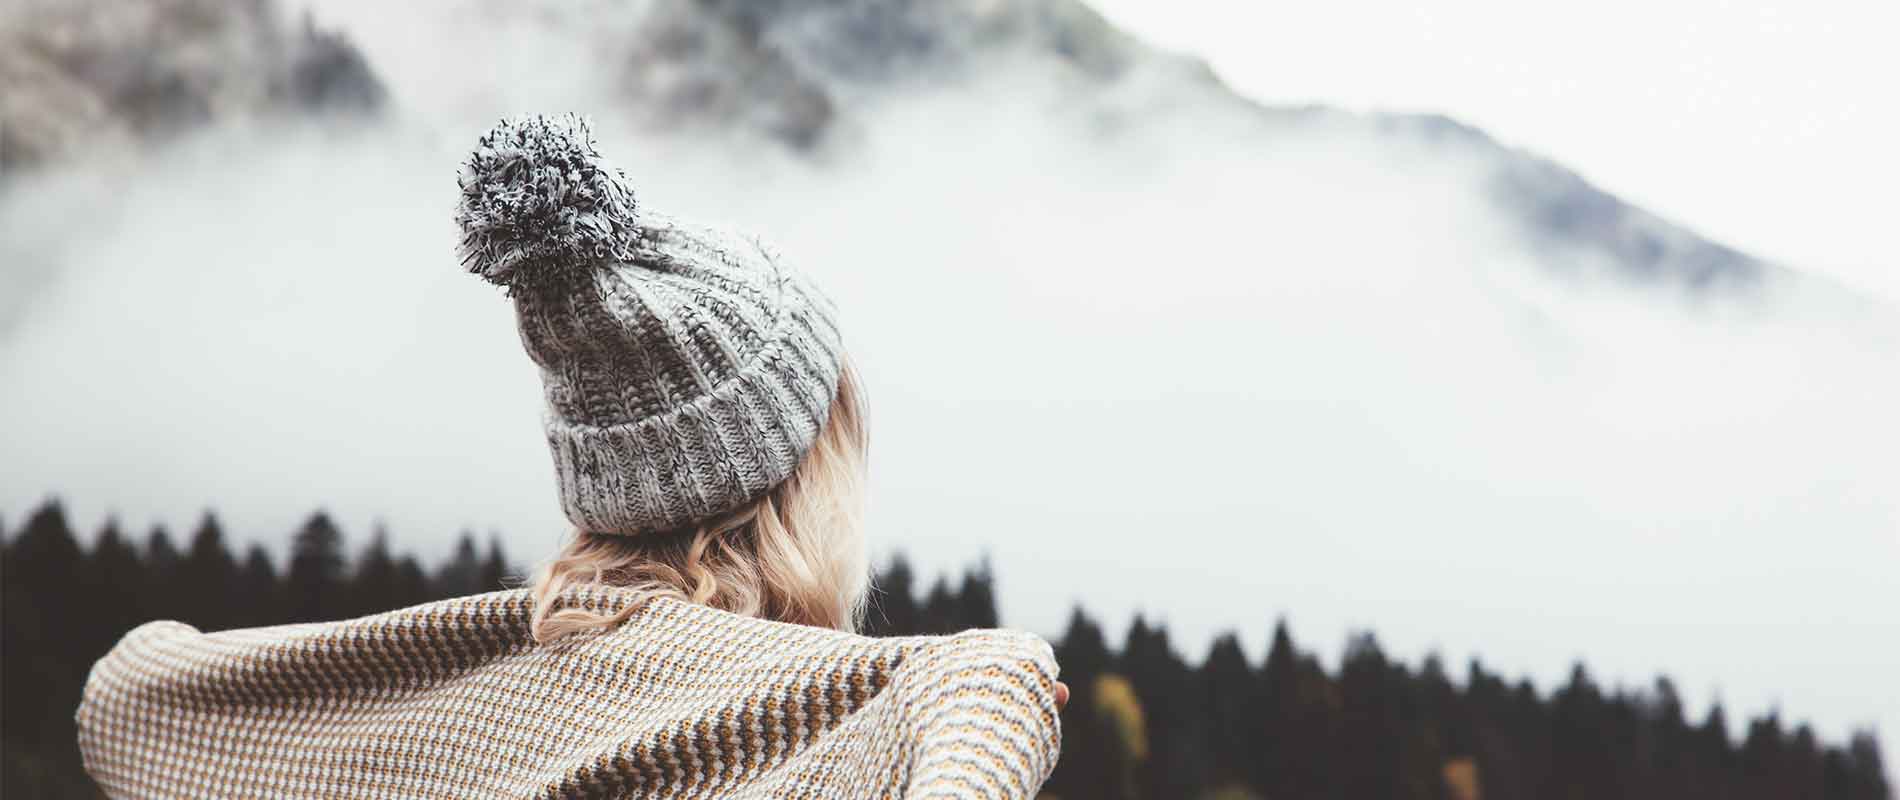 Girl staying warm in wintry setting wearing a knitted bobble hat